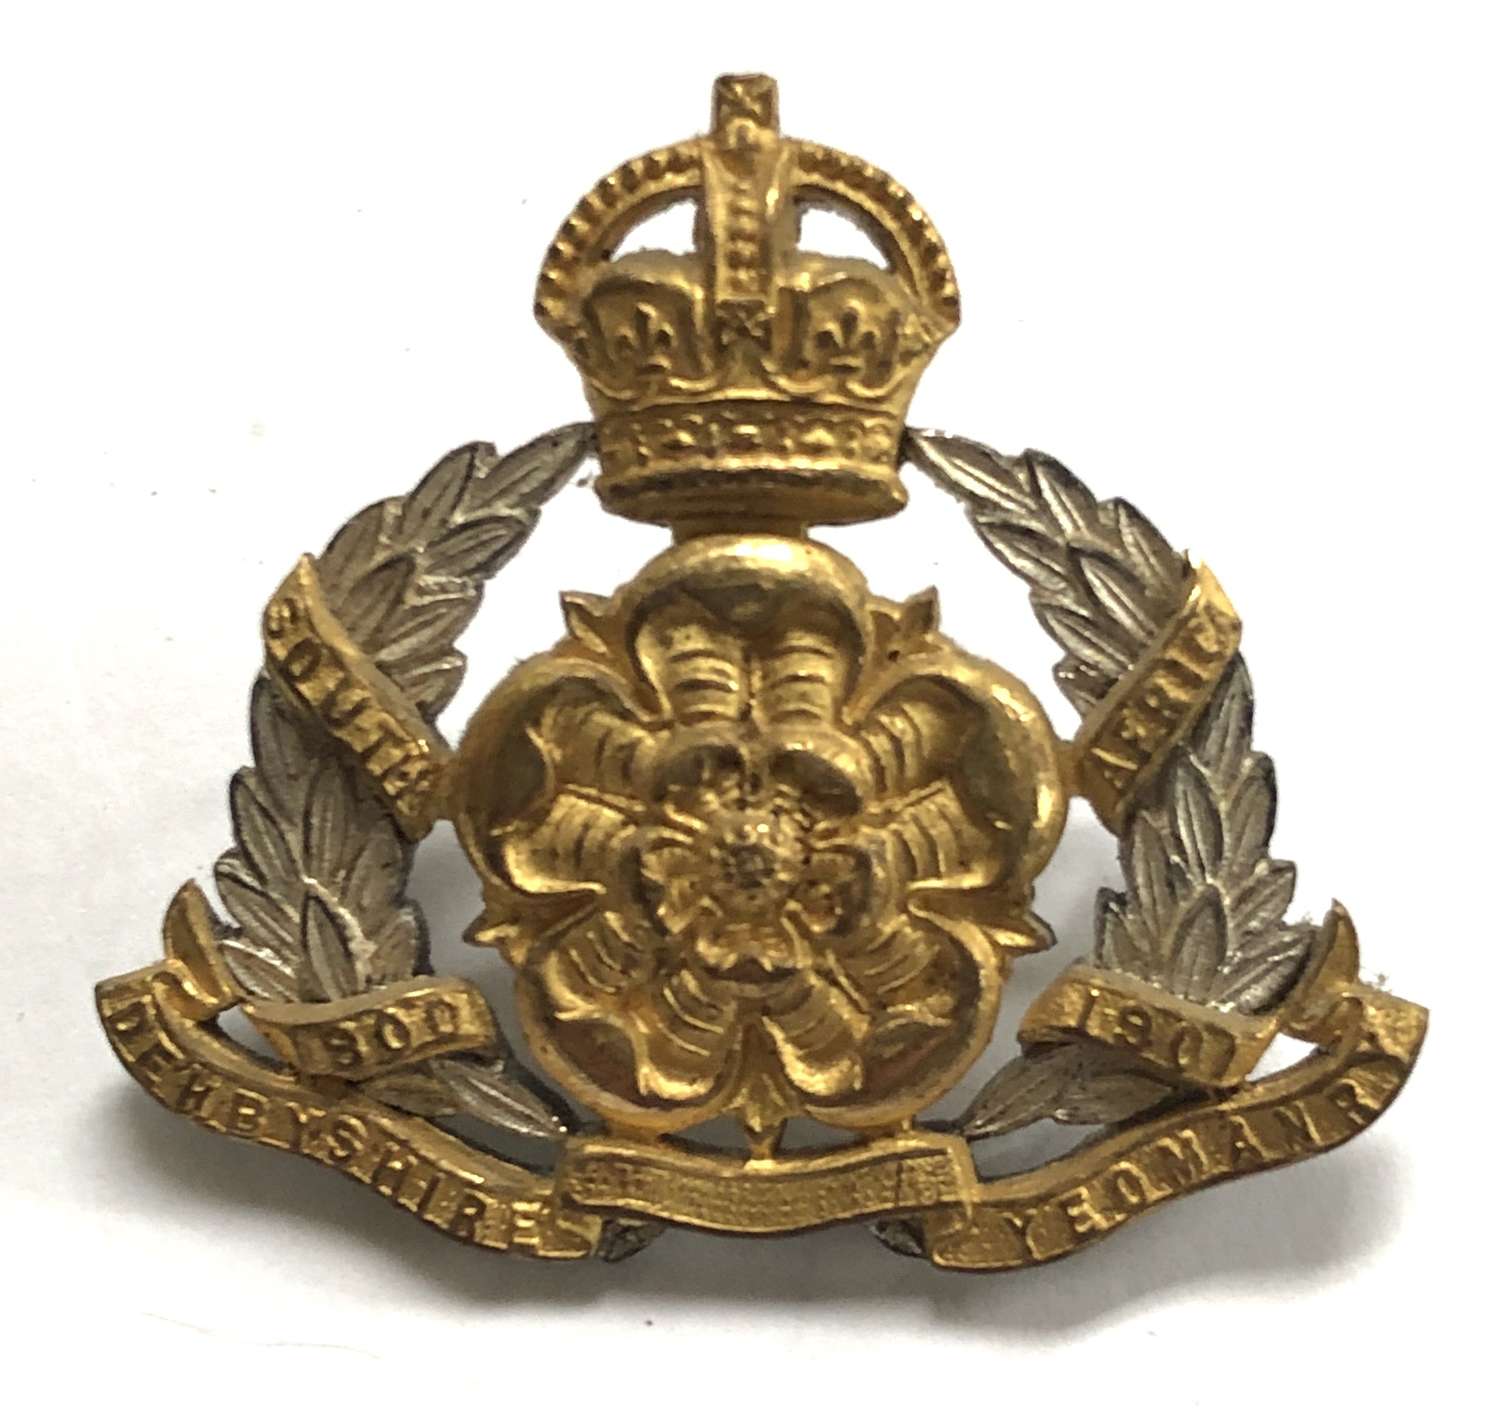 Derbyshire Yeomanry pre 1953 Officer’s cap badge by Gaunt